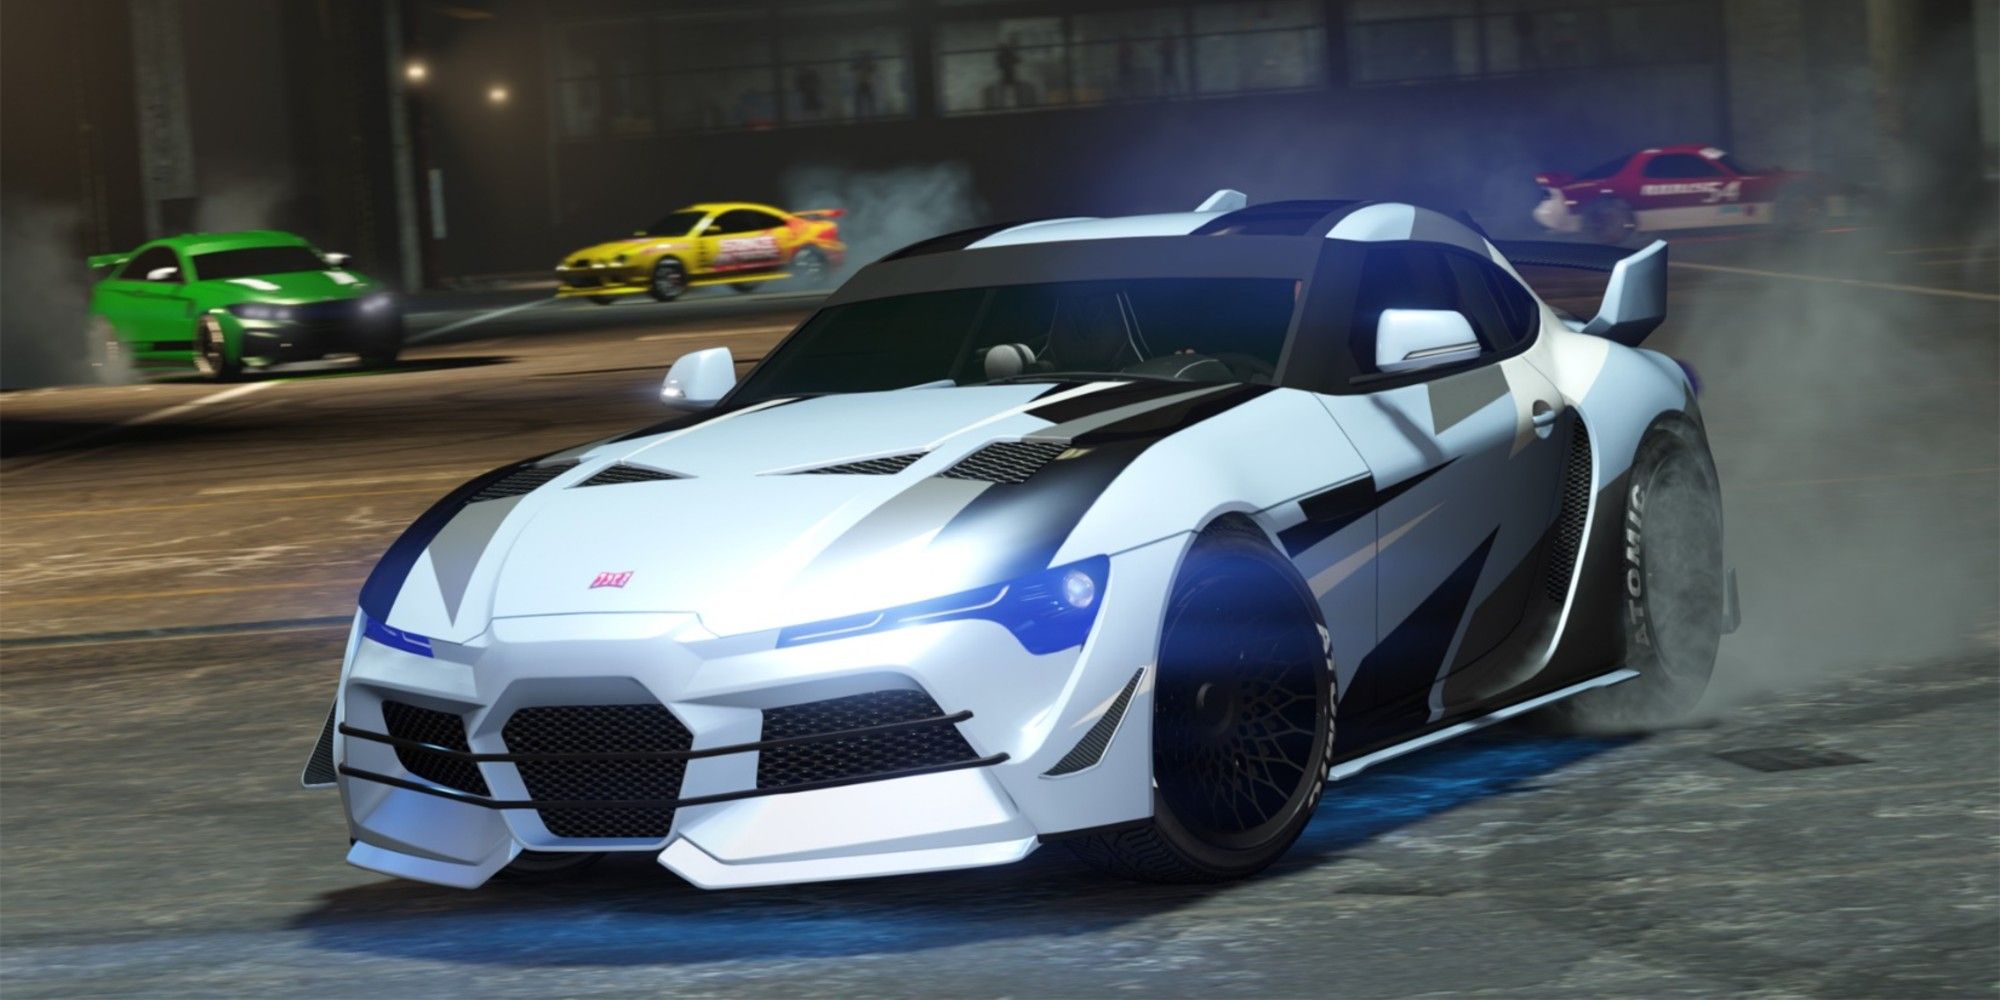 GTA Online Vehicles Are Getting Speed Upgrades